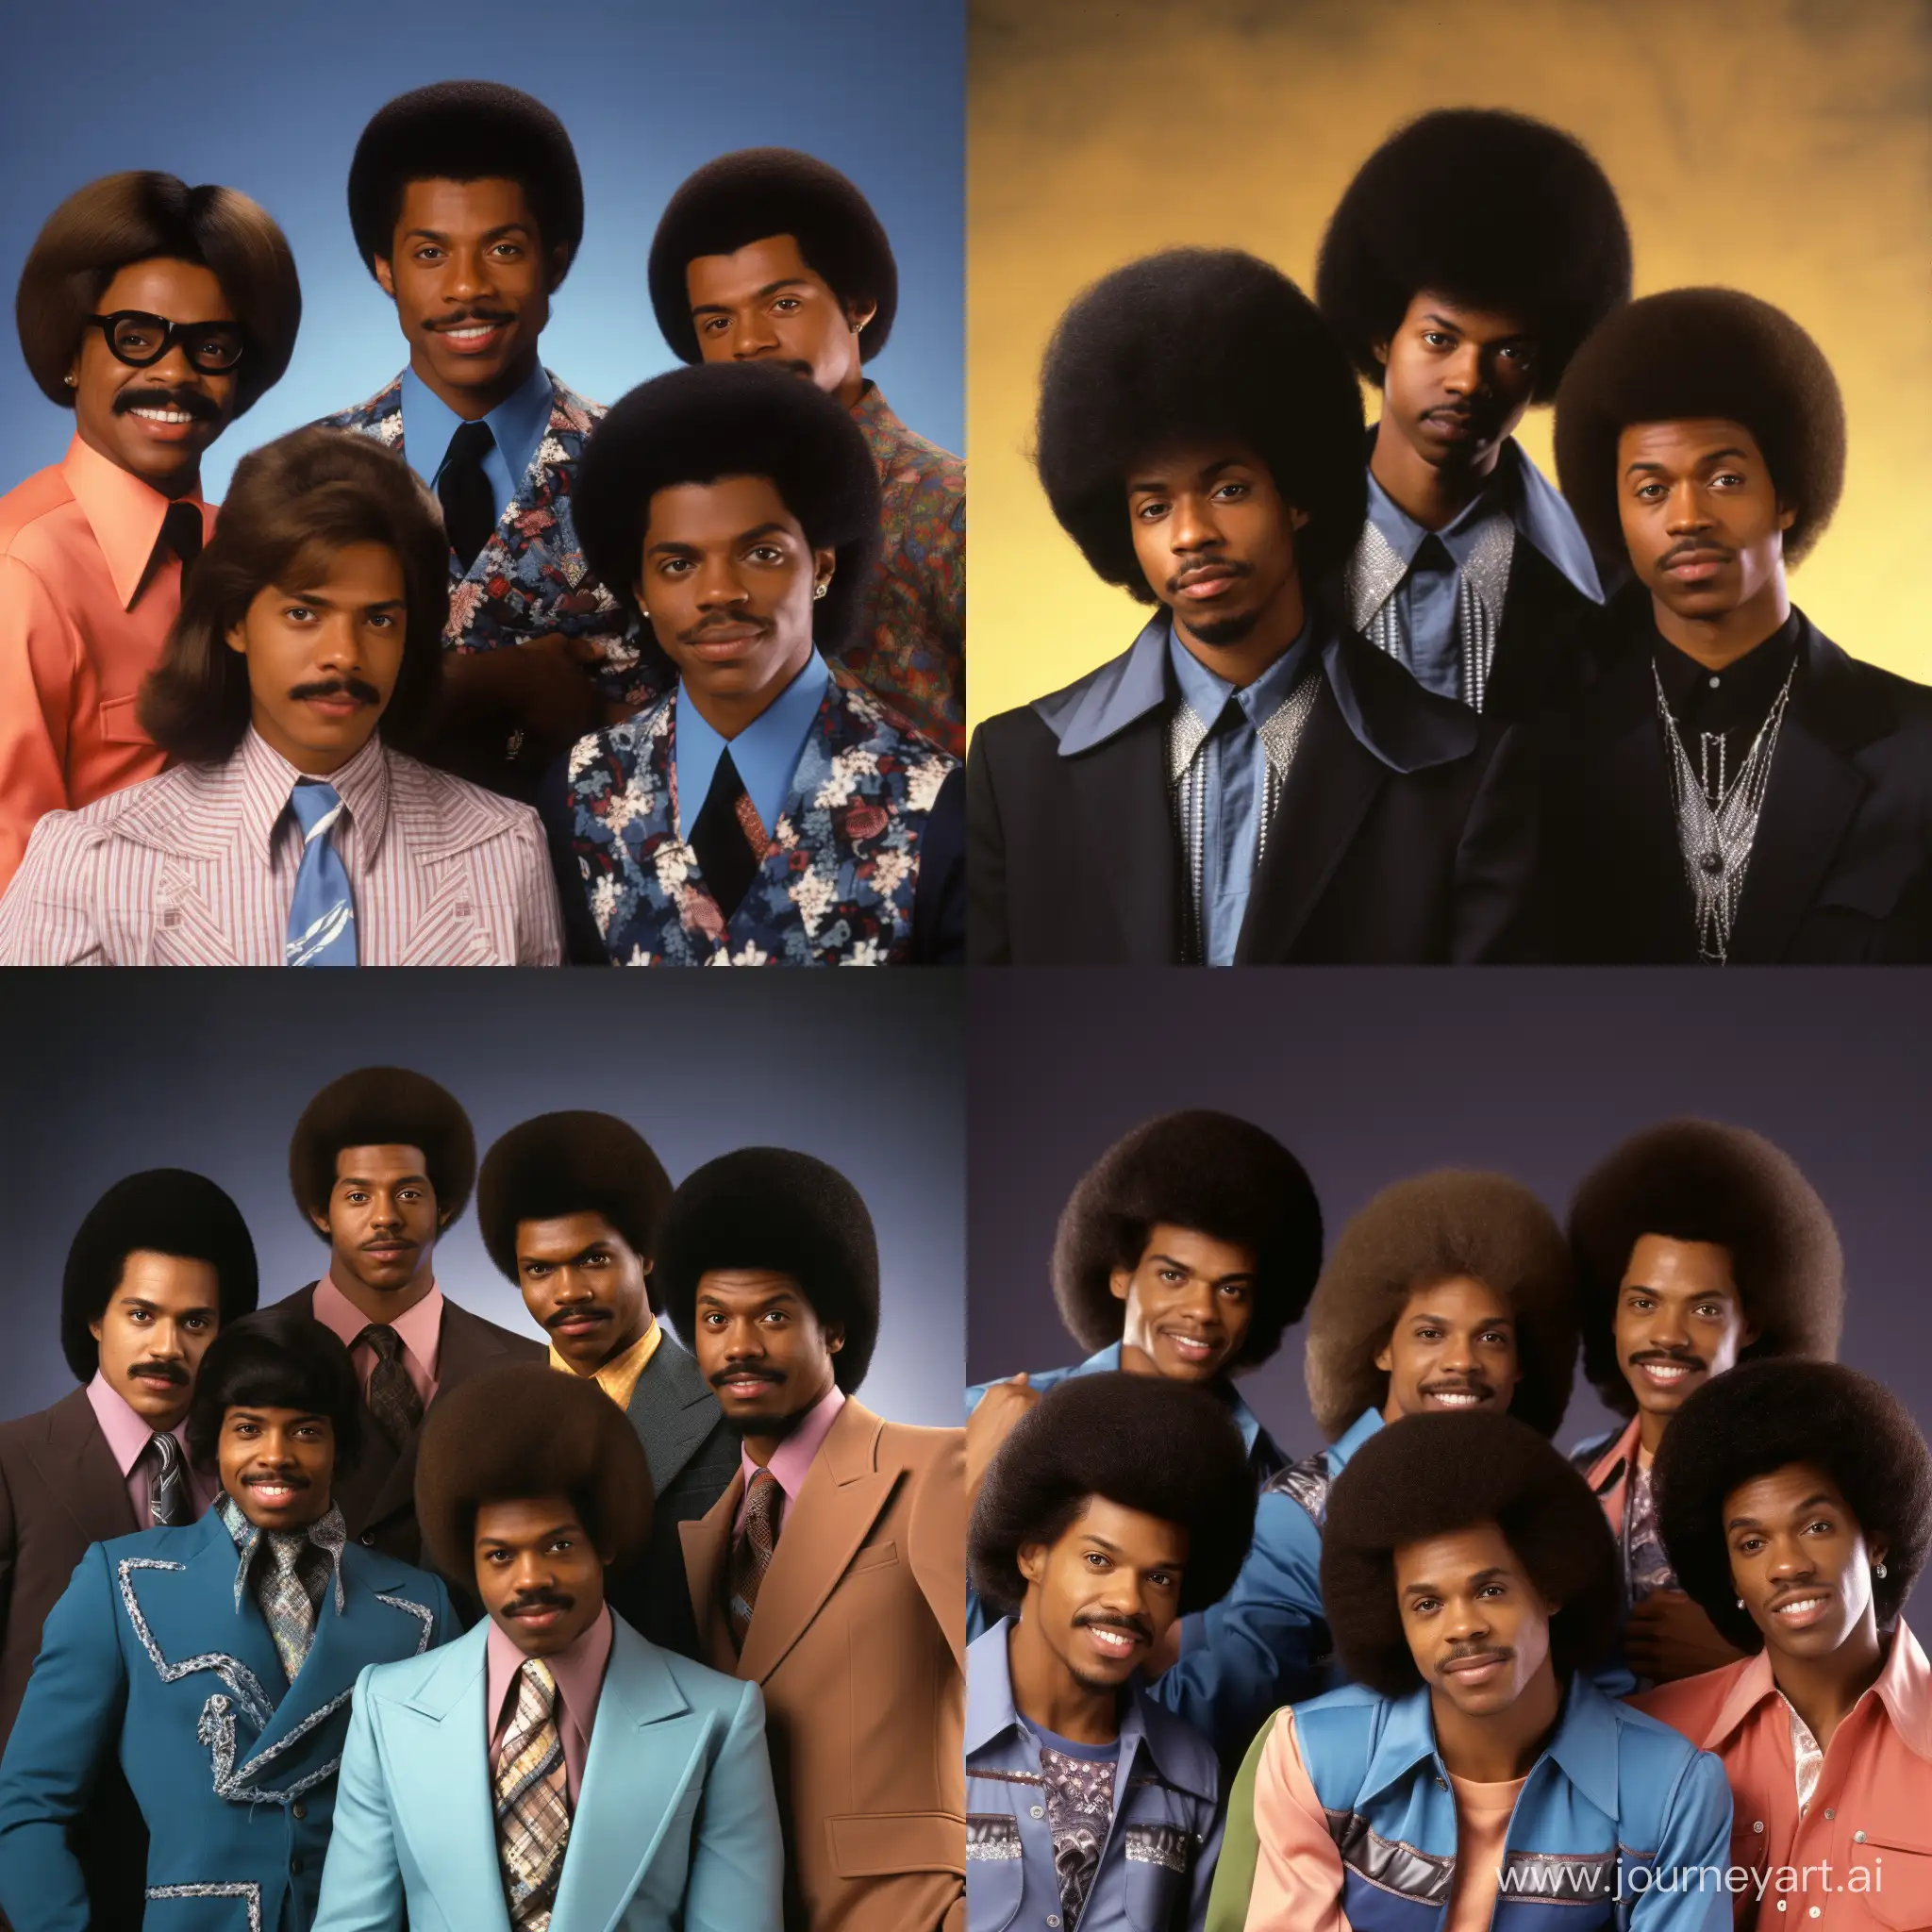 R&b group of men with kinky conk hairstyle with relaxer in 1979